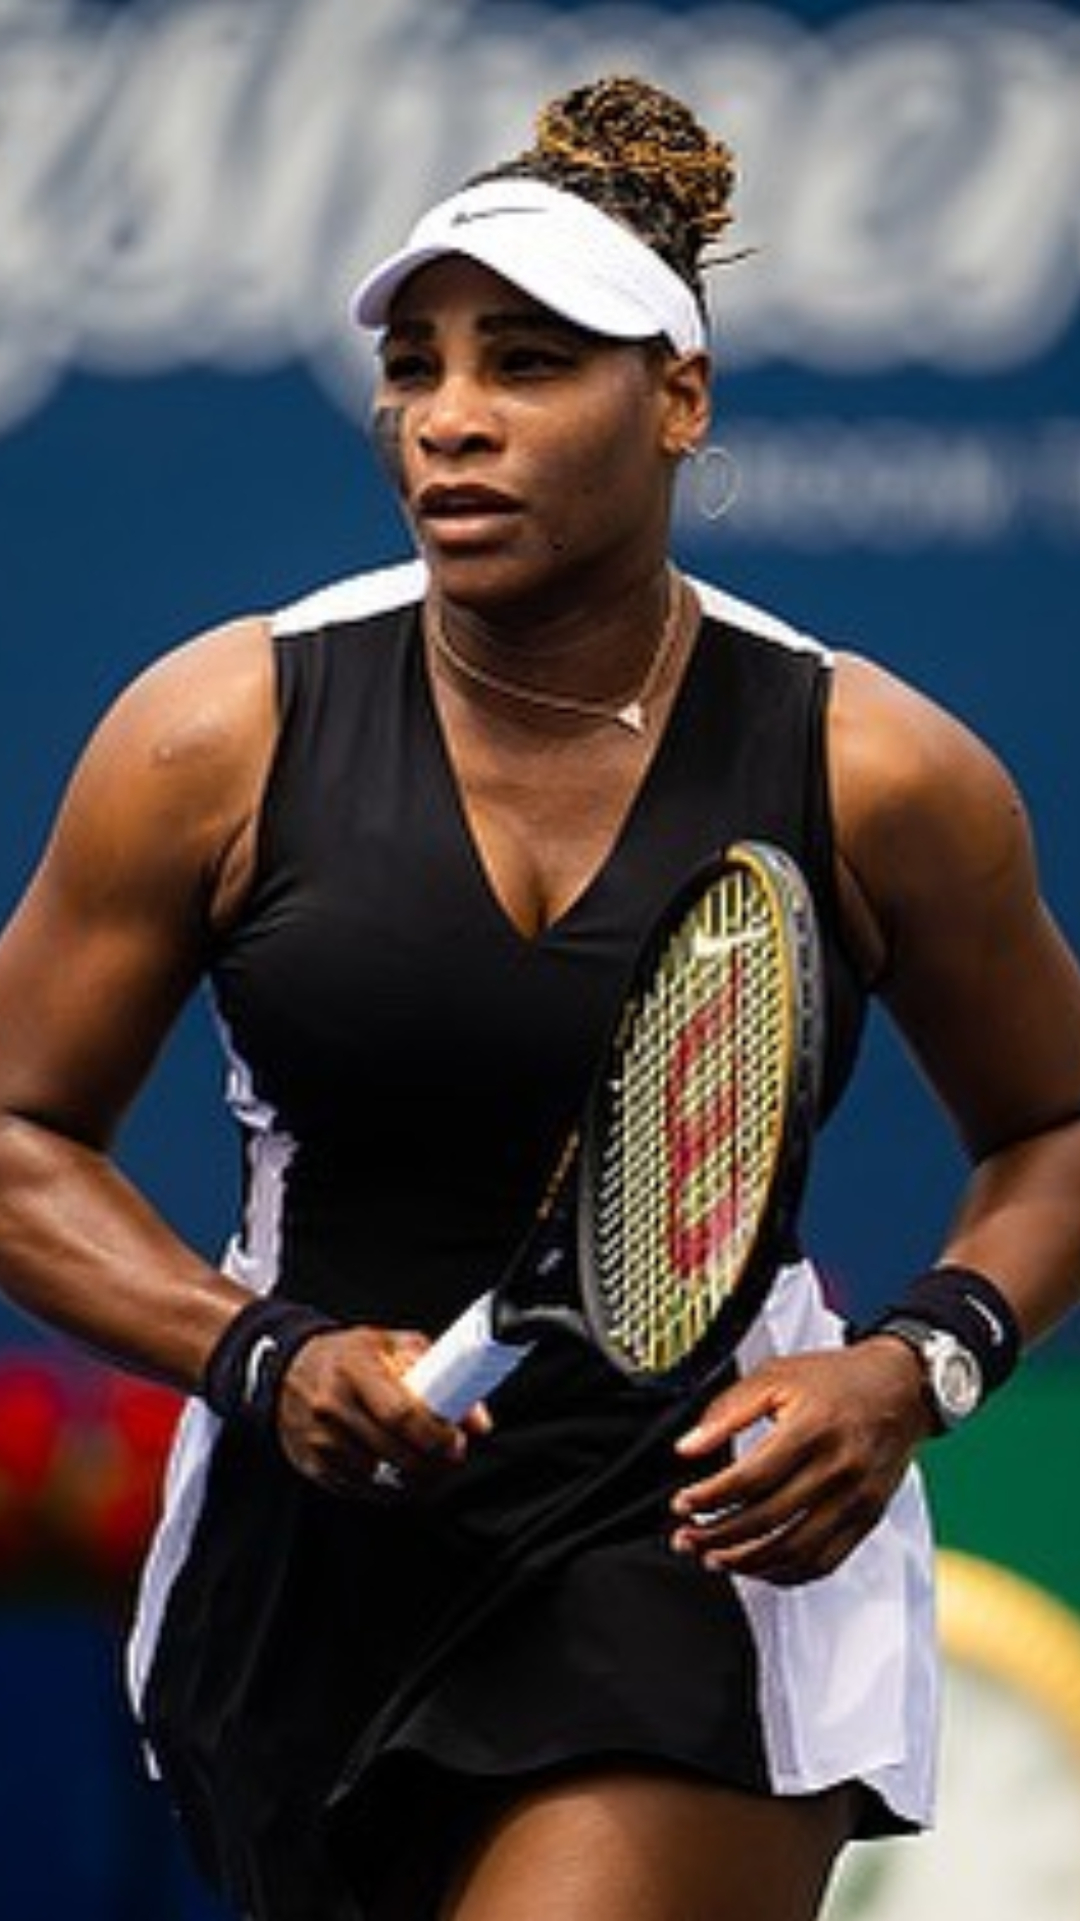 US Here's list of top 5 female tennis players with most